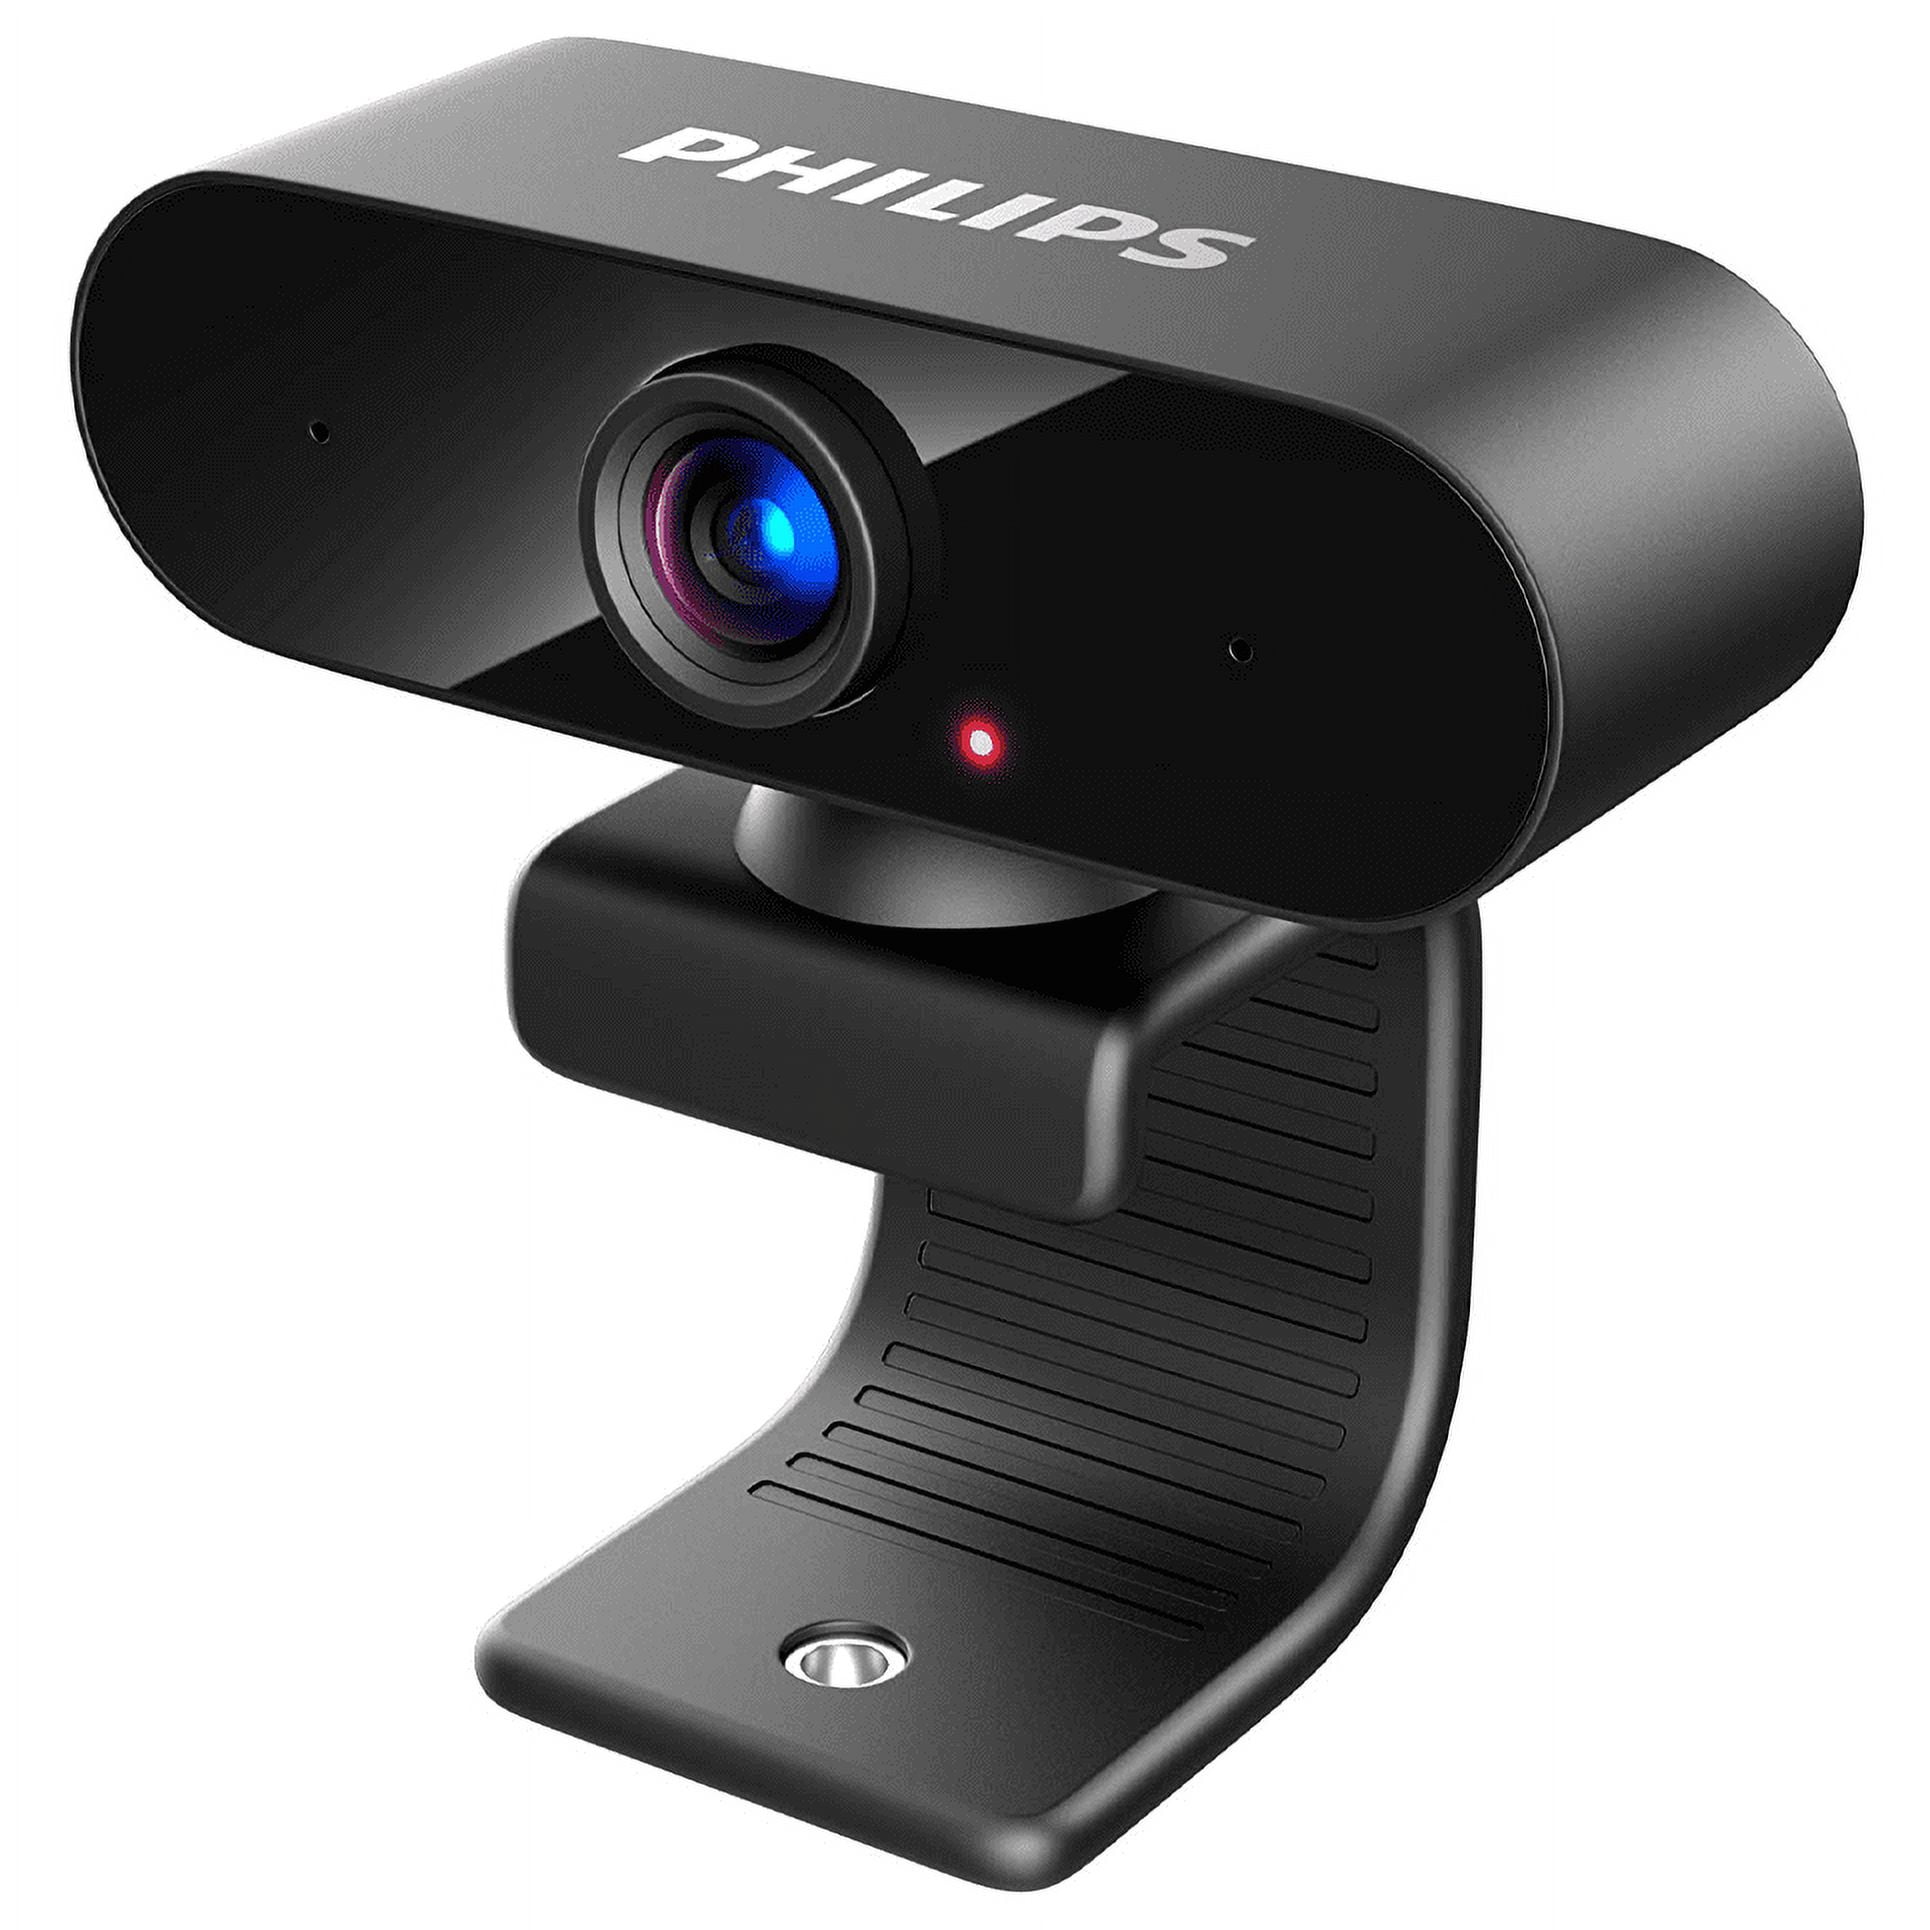 Philips PC Webcam W Microphone Full HD 1080P, USB Computer Camera, 360°  Rotate, for PC Conferencing/Calling Mac - Zoom